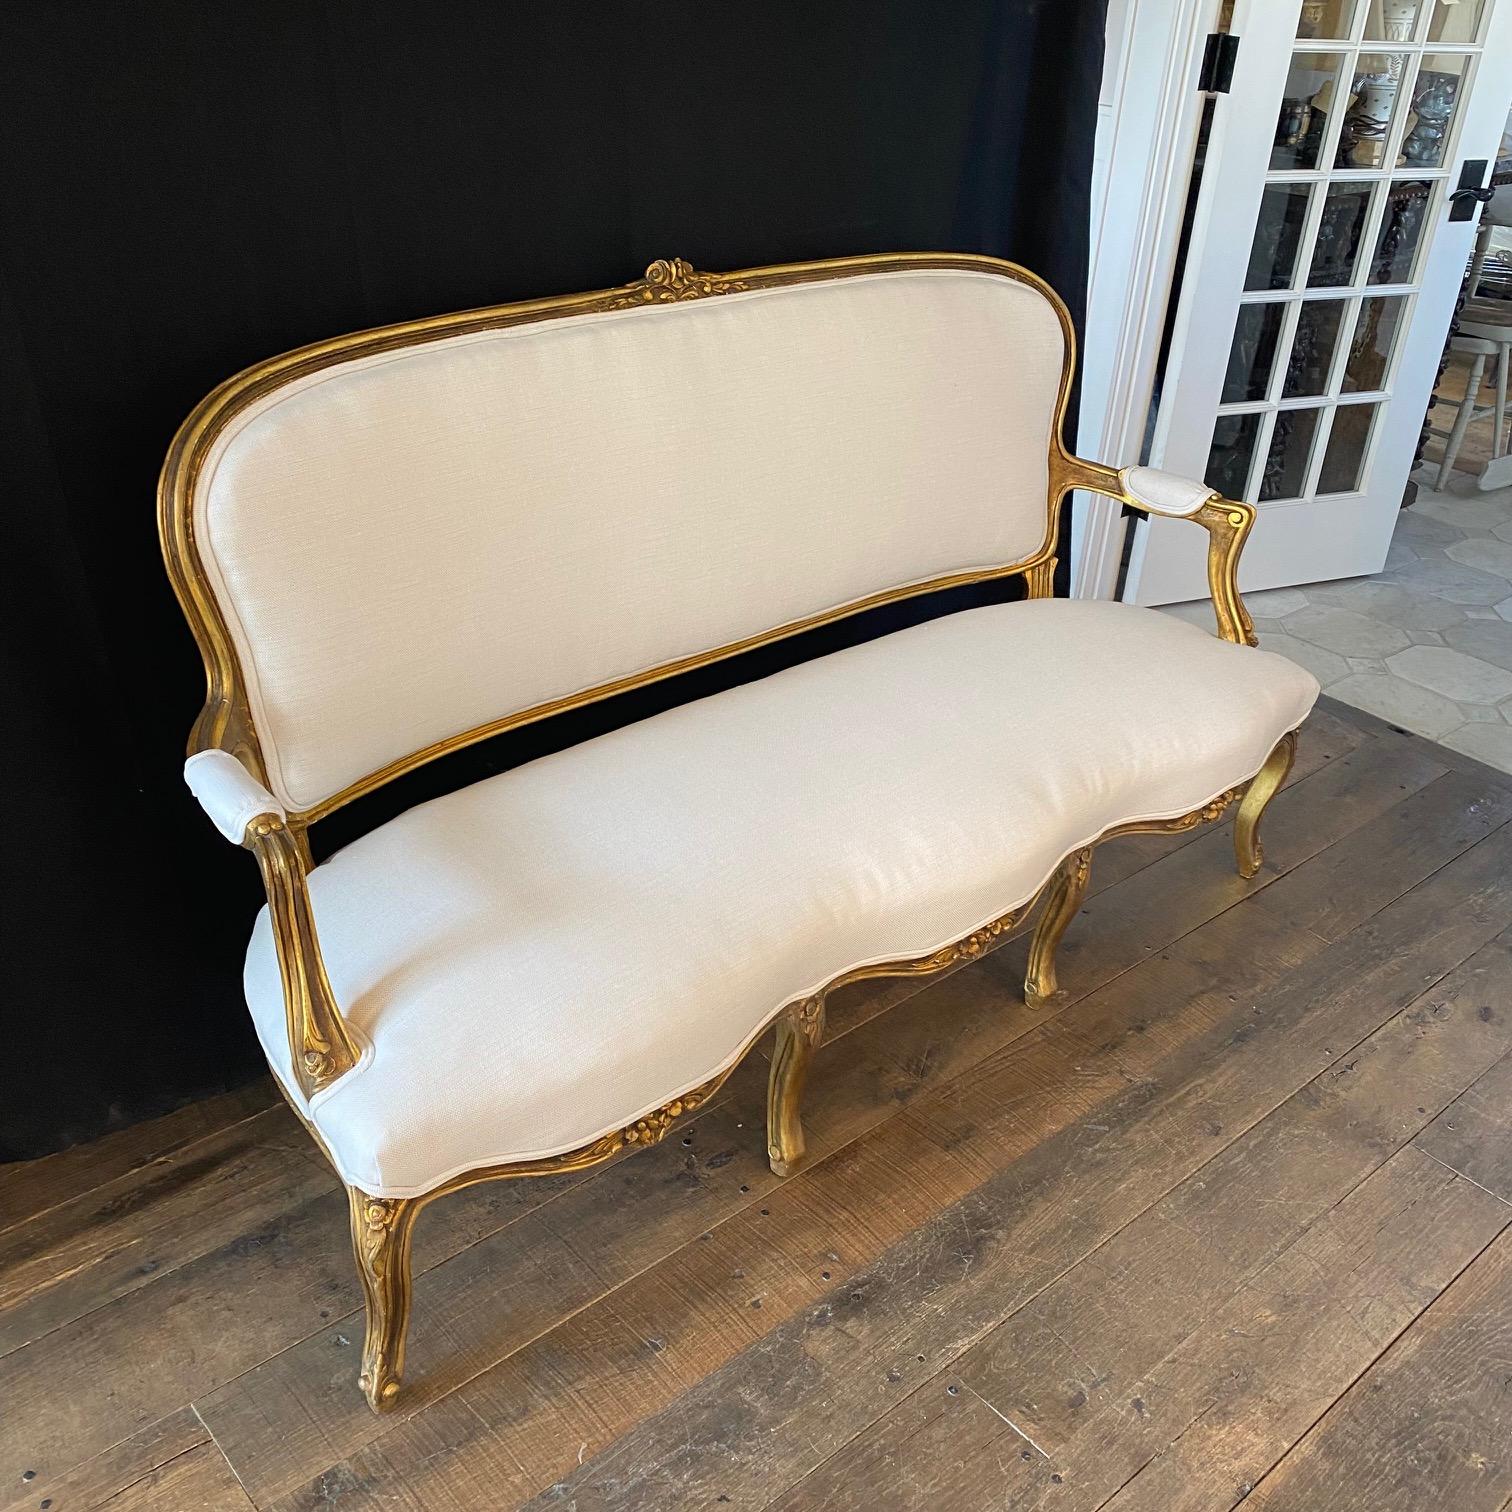 French Gold Giltwood Louis XV Sofa, Loveseat or Settee Newly Reupholstered  For Sale 1